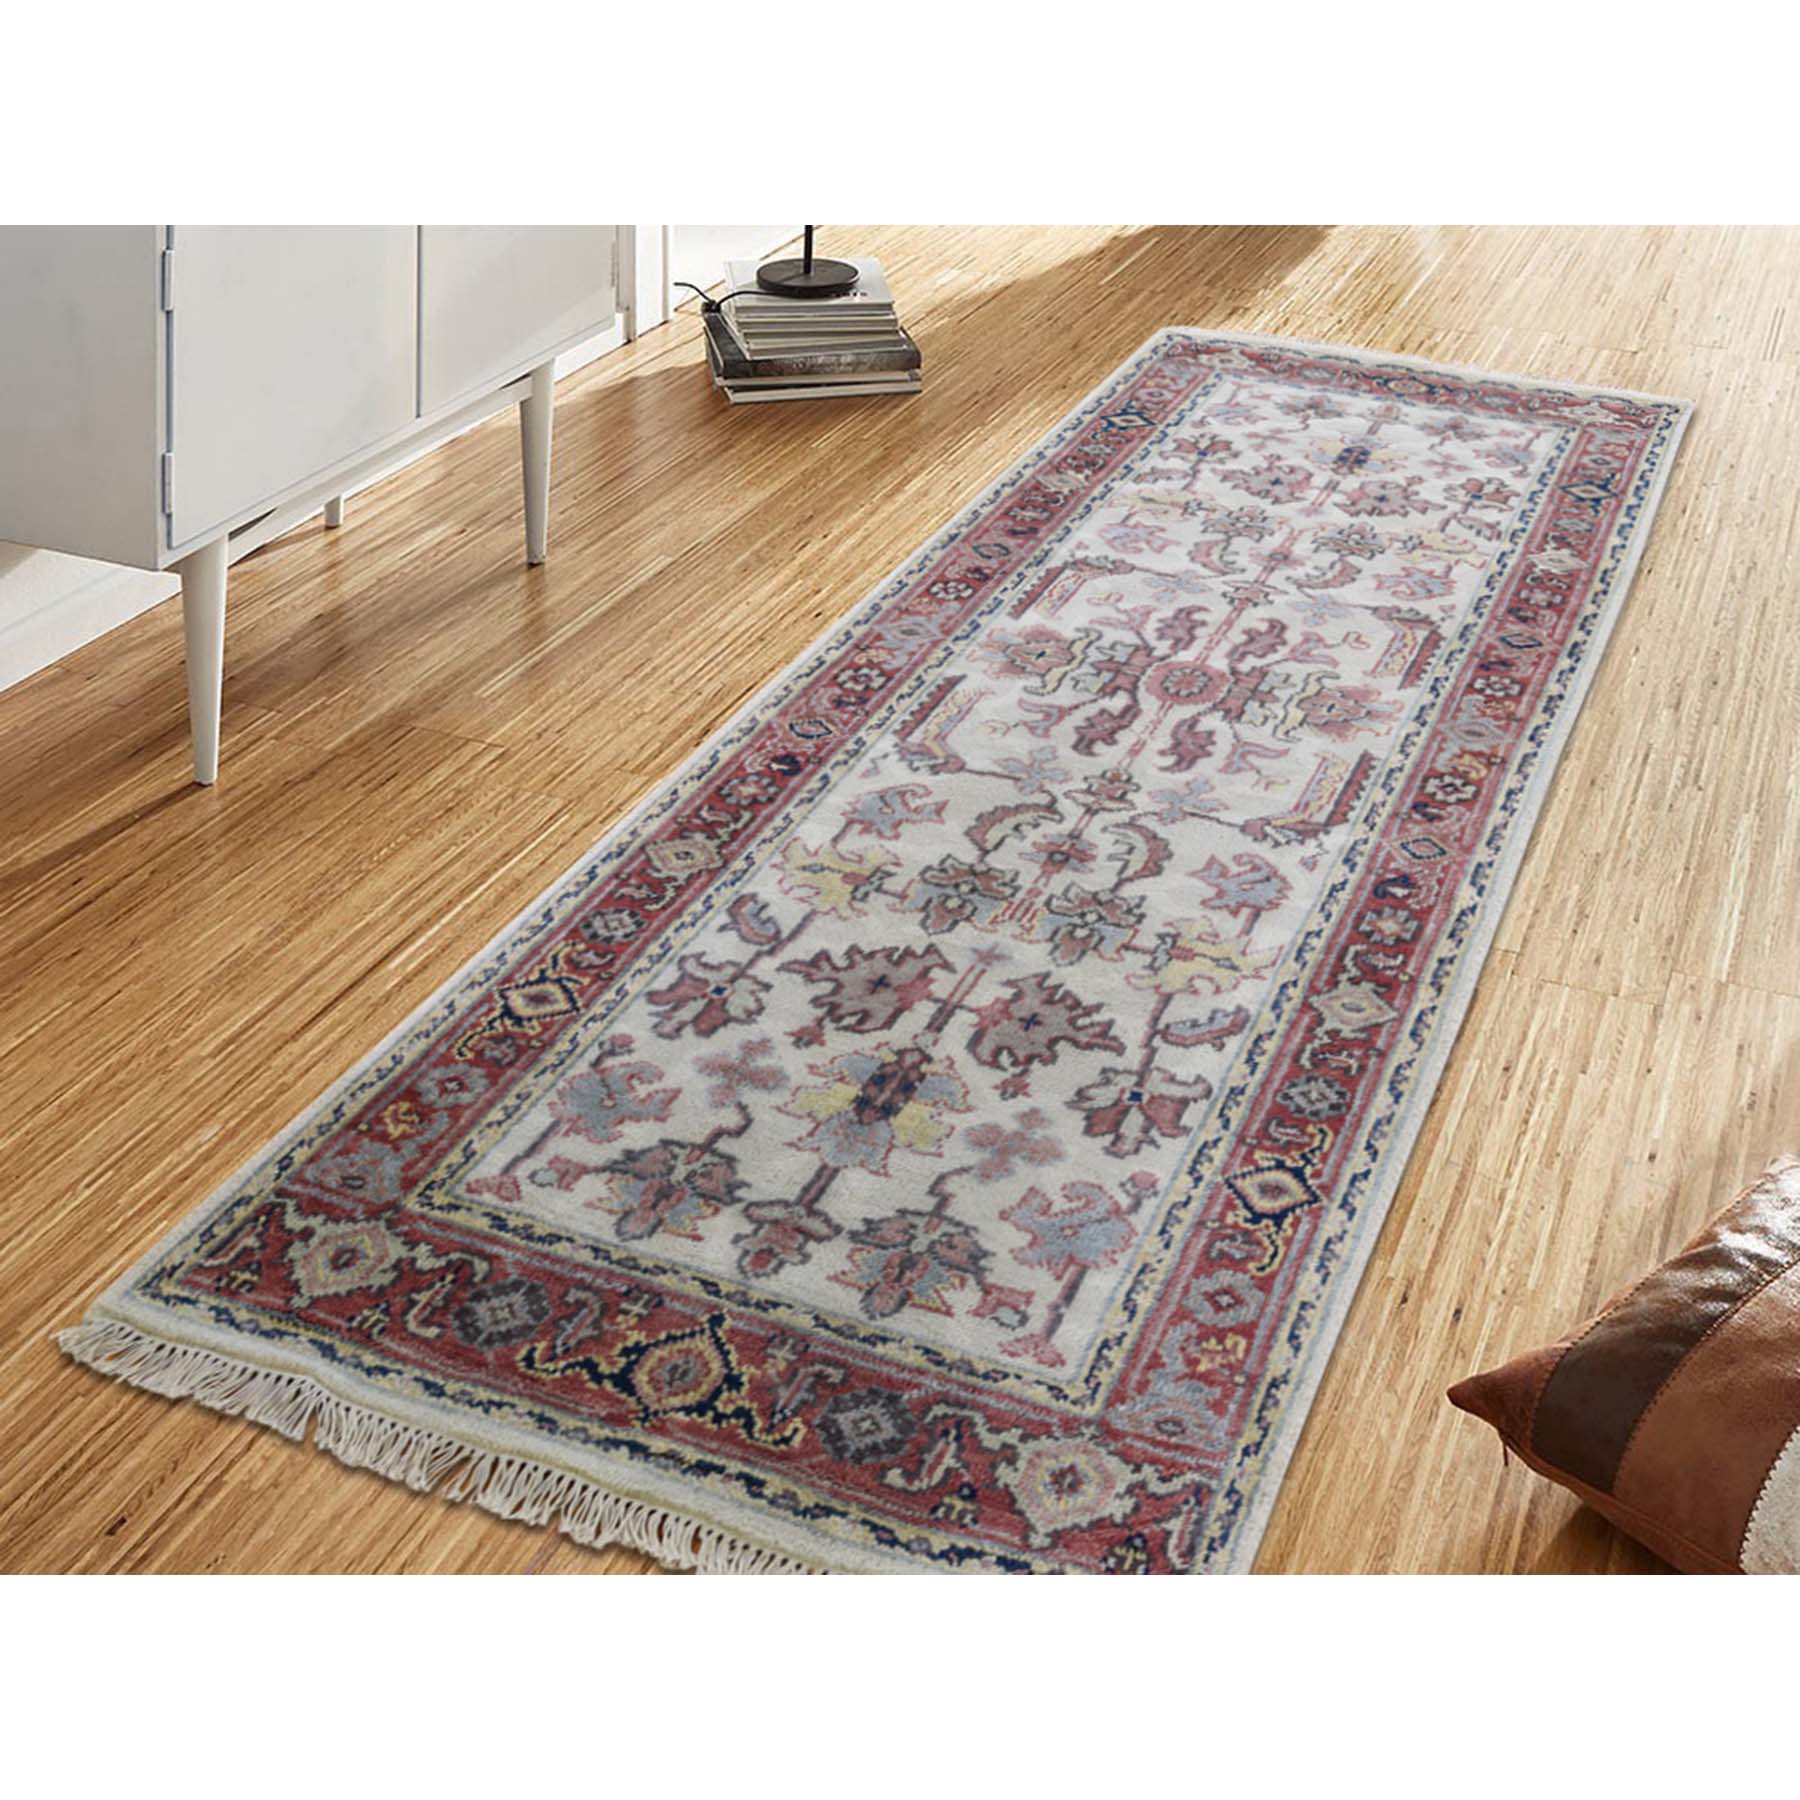 2-5 x5-10  Ivory Heriz Revival All Over Design Pure Wool Hand-Knotted Oriental Runner Rug 